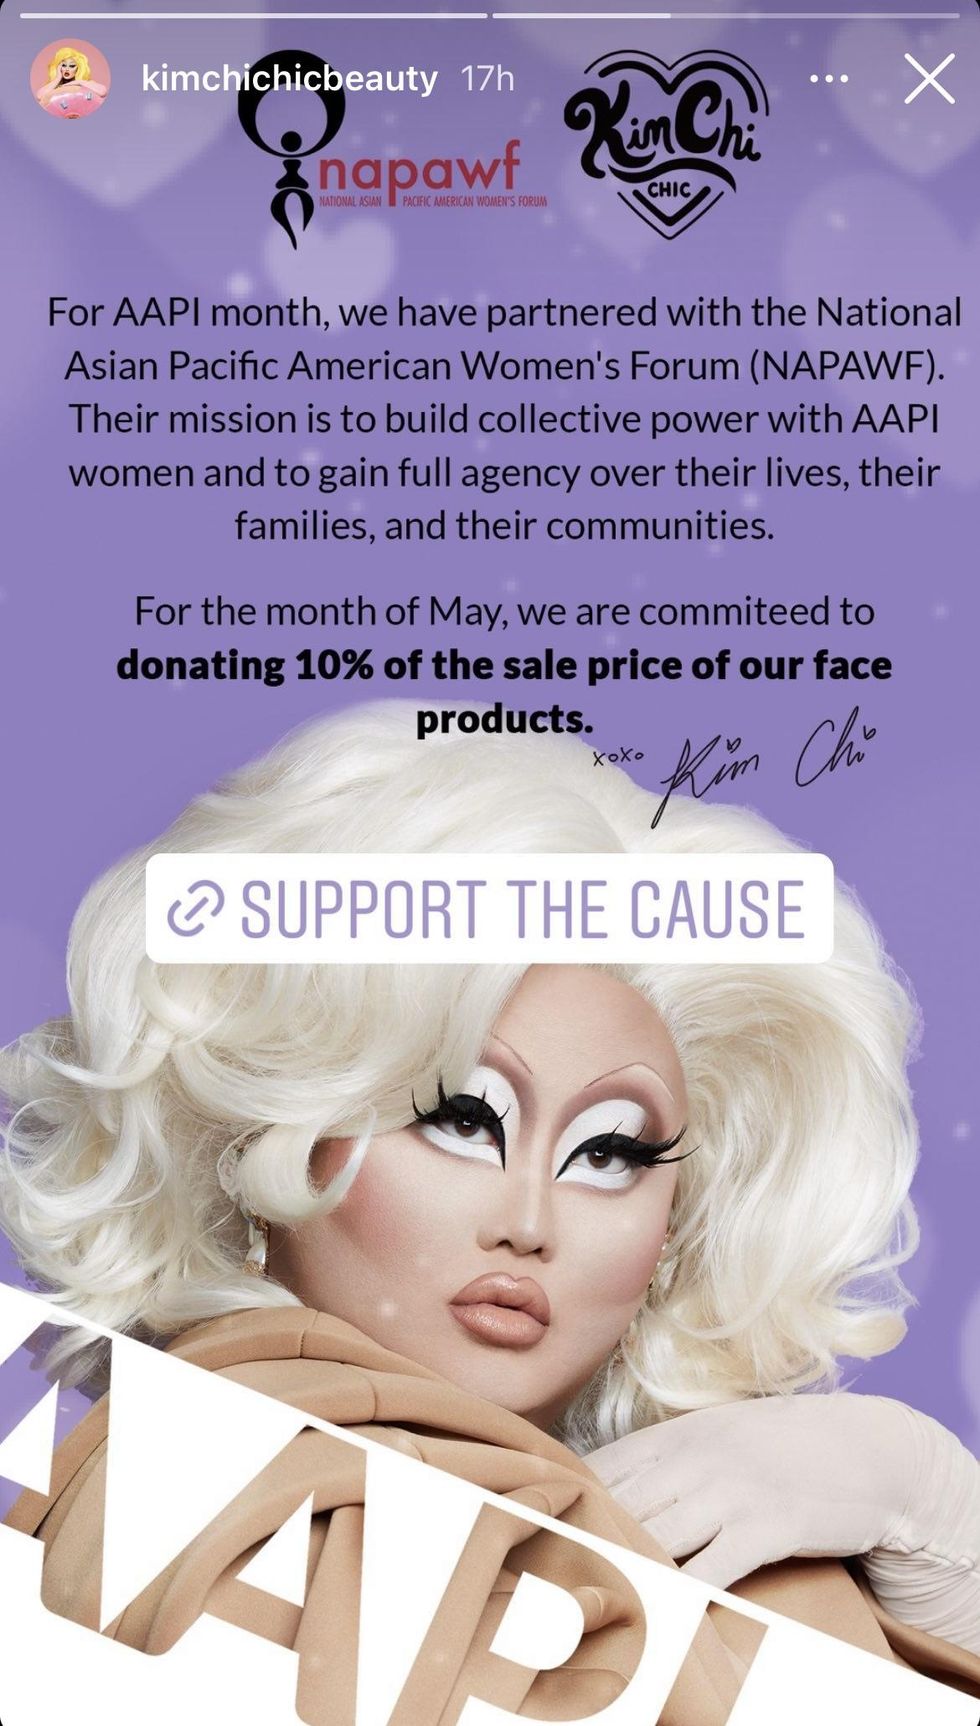 Kim Chi shares Instagram Story about AAPI Month